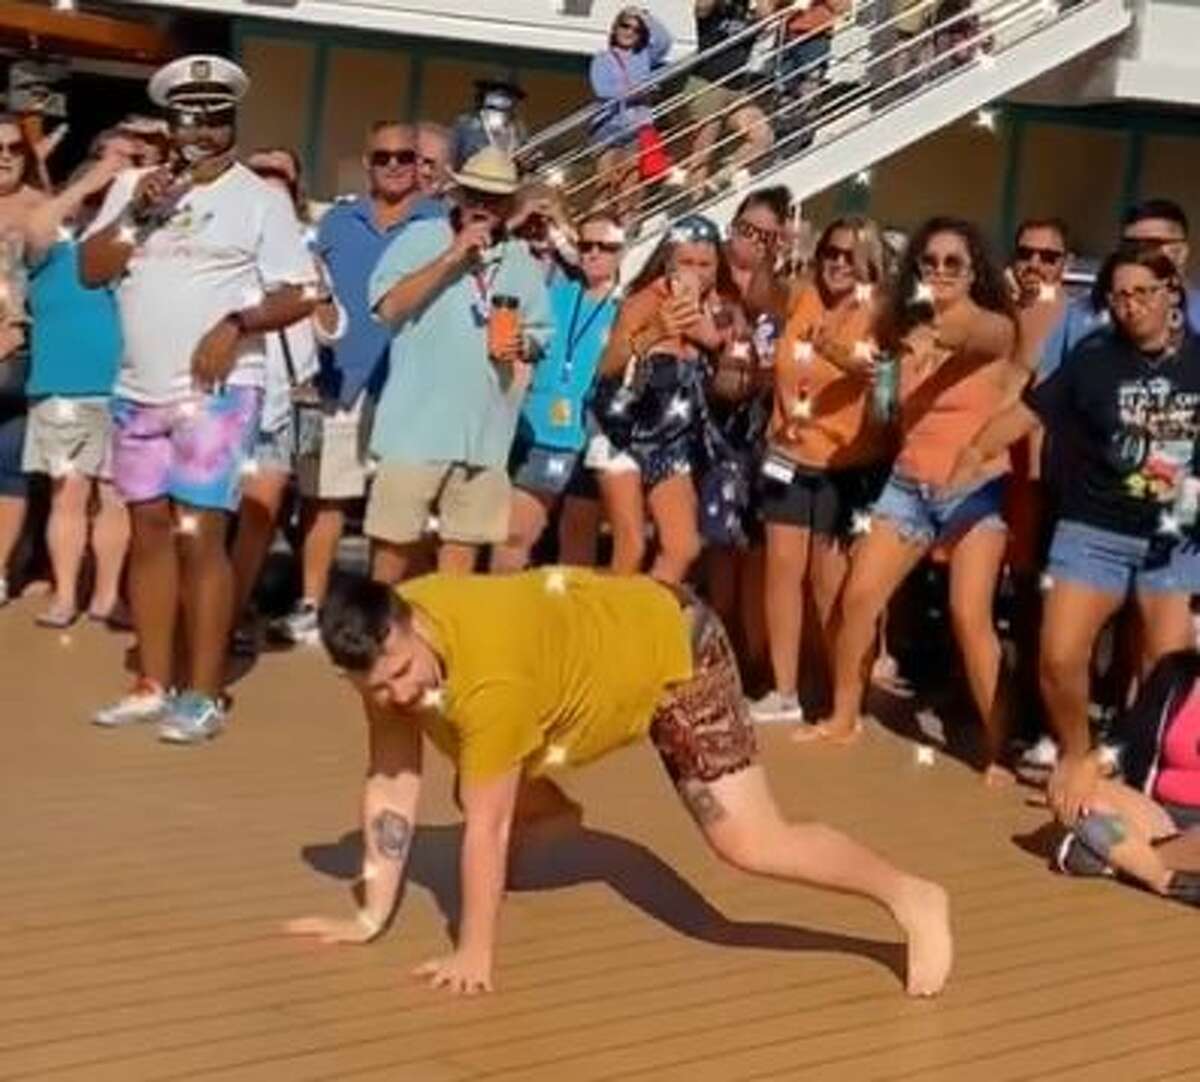 Blake Butler, a 27-year-old man from a small town in East Texas called DeBerry, recently went viral on TikTok for leaving no crumbs while on a Carnival Cruise earlier this month.